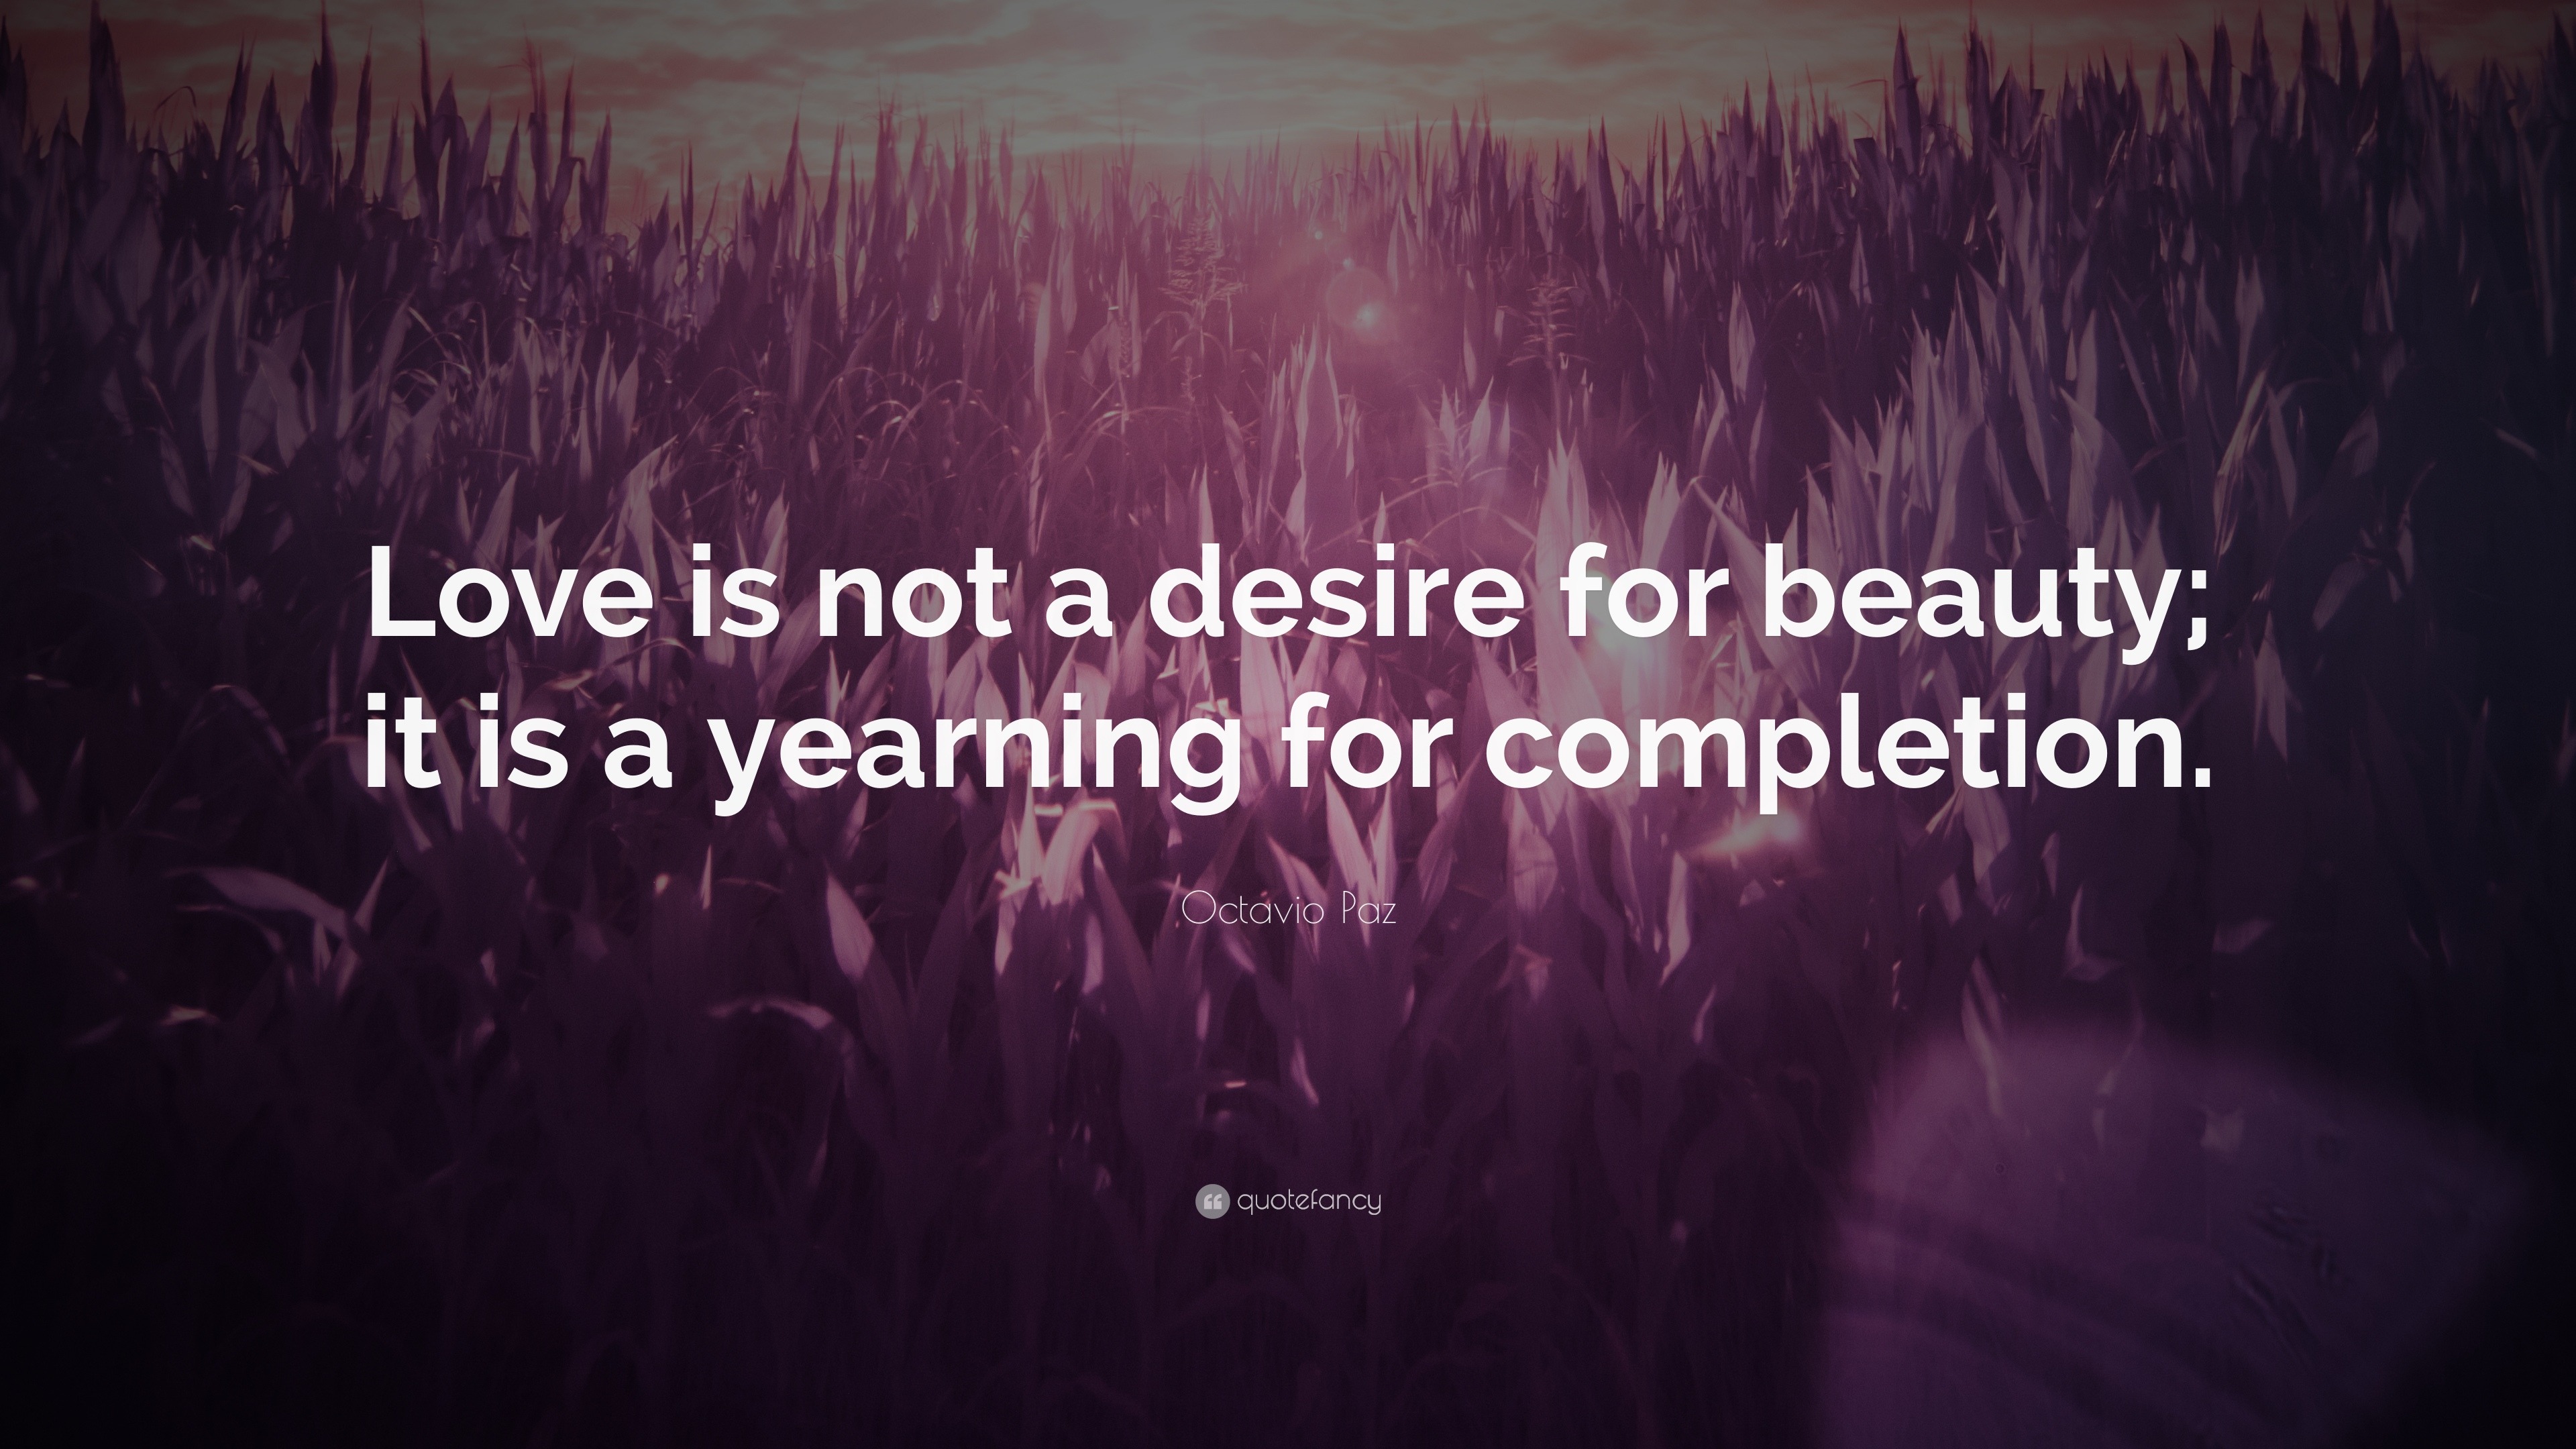 Octavio Paz Quote: "Love is not a desire for beauty; it is a yearning for completion." (10 ...